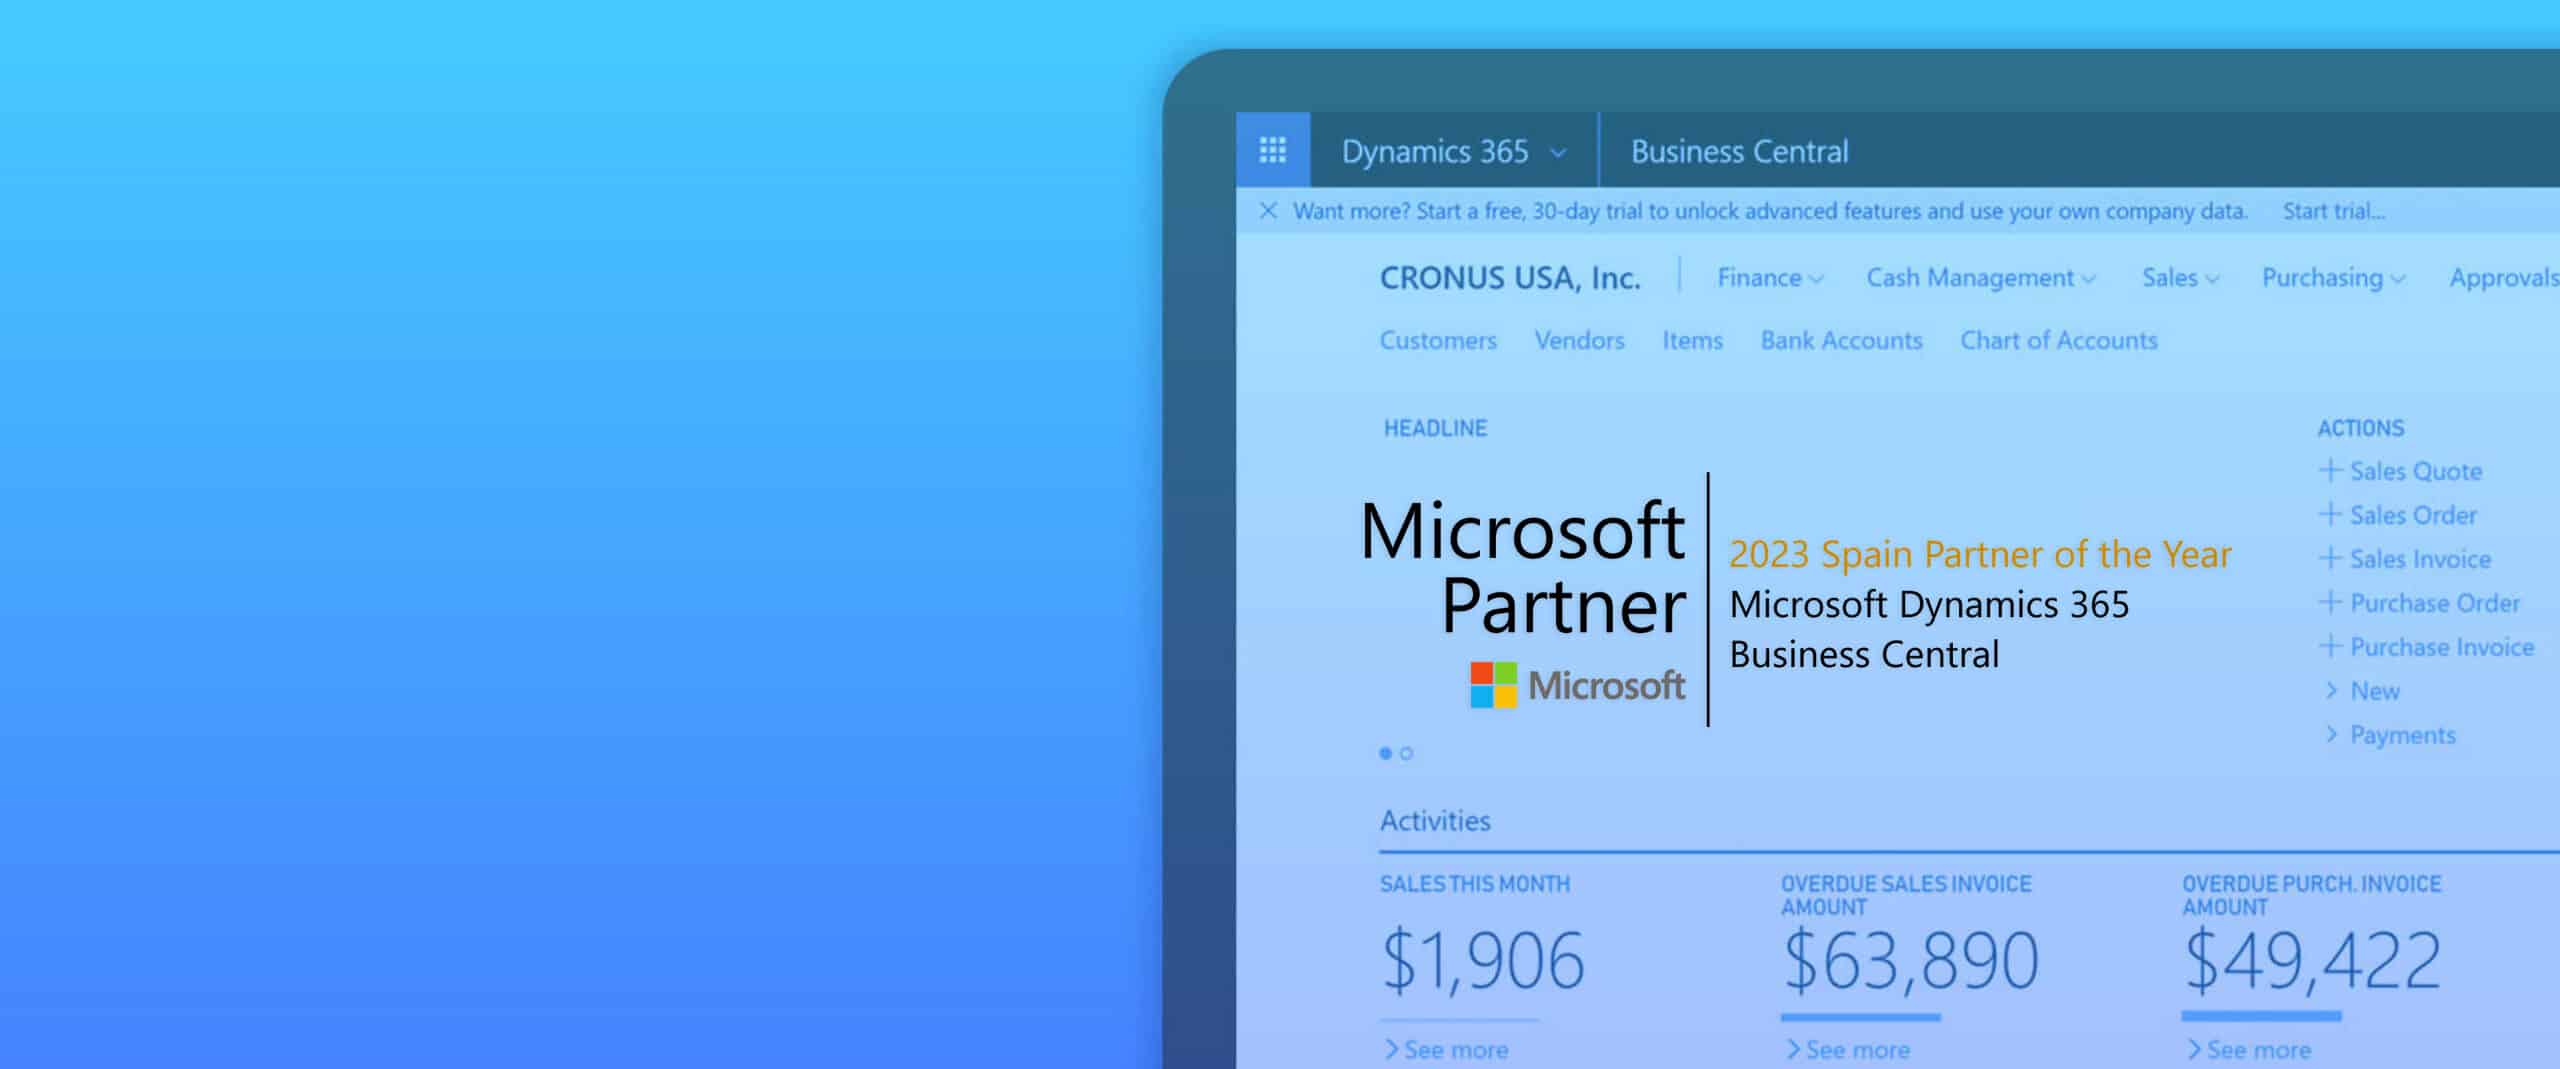 Premio Microsoft Partner of the Year 2023 Business Central